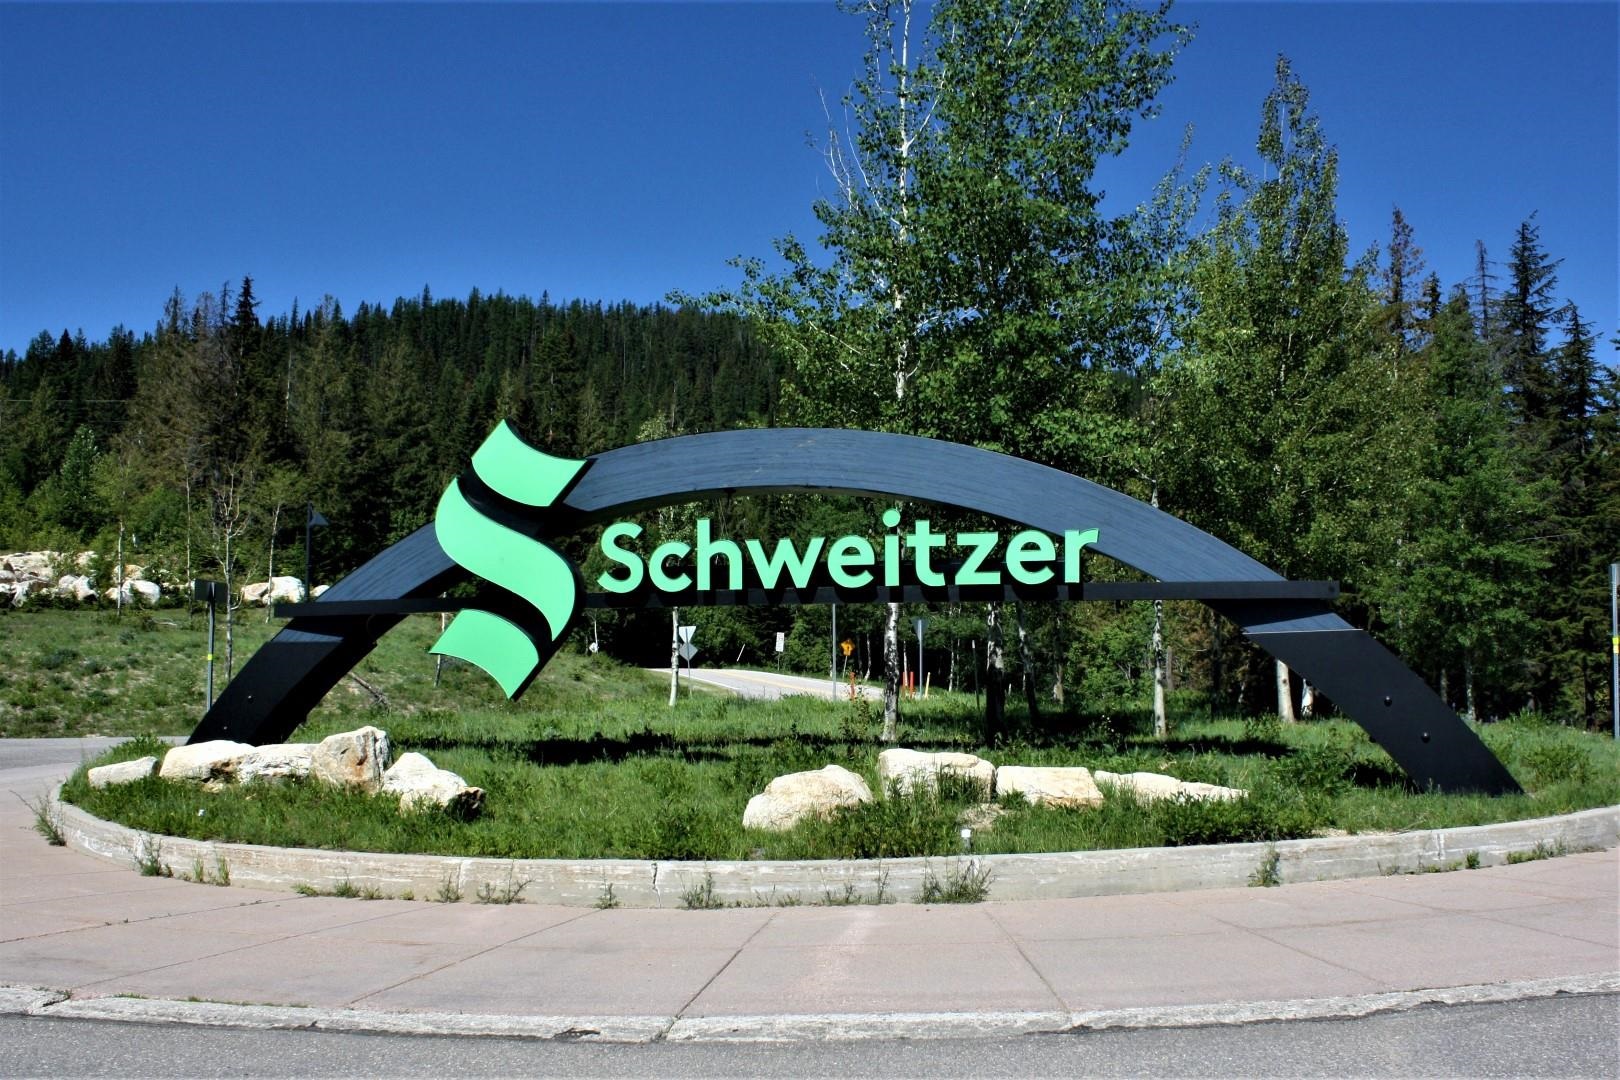 Lot 13 and 14 Schweitzer Mountain Road, Sandpoint, ID 83864